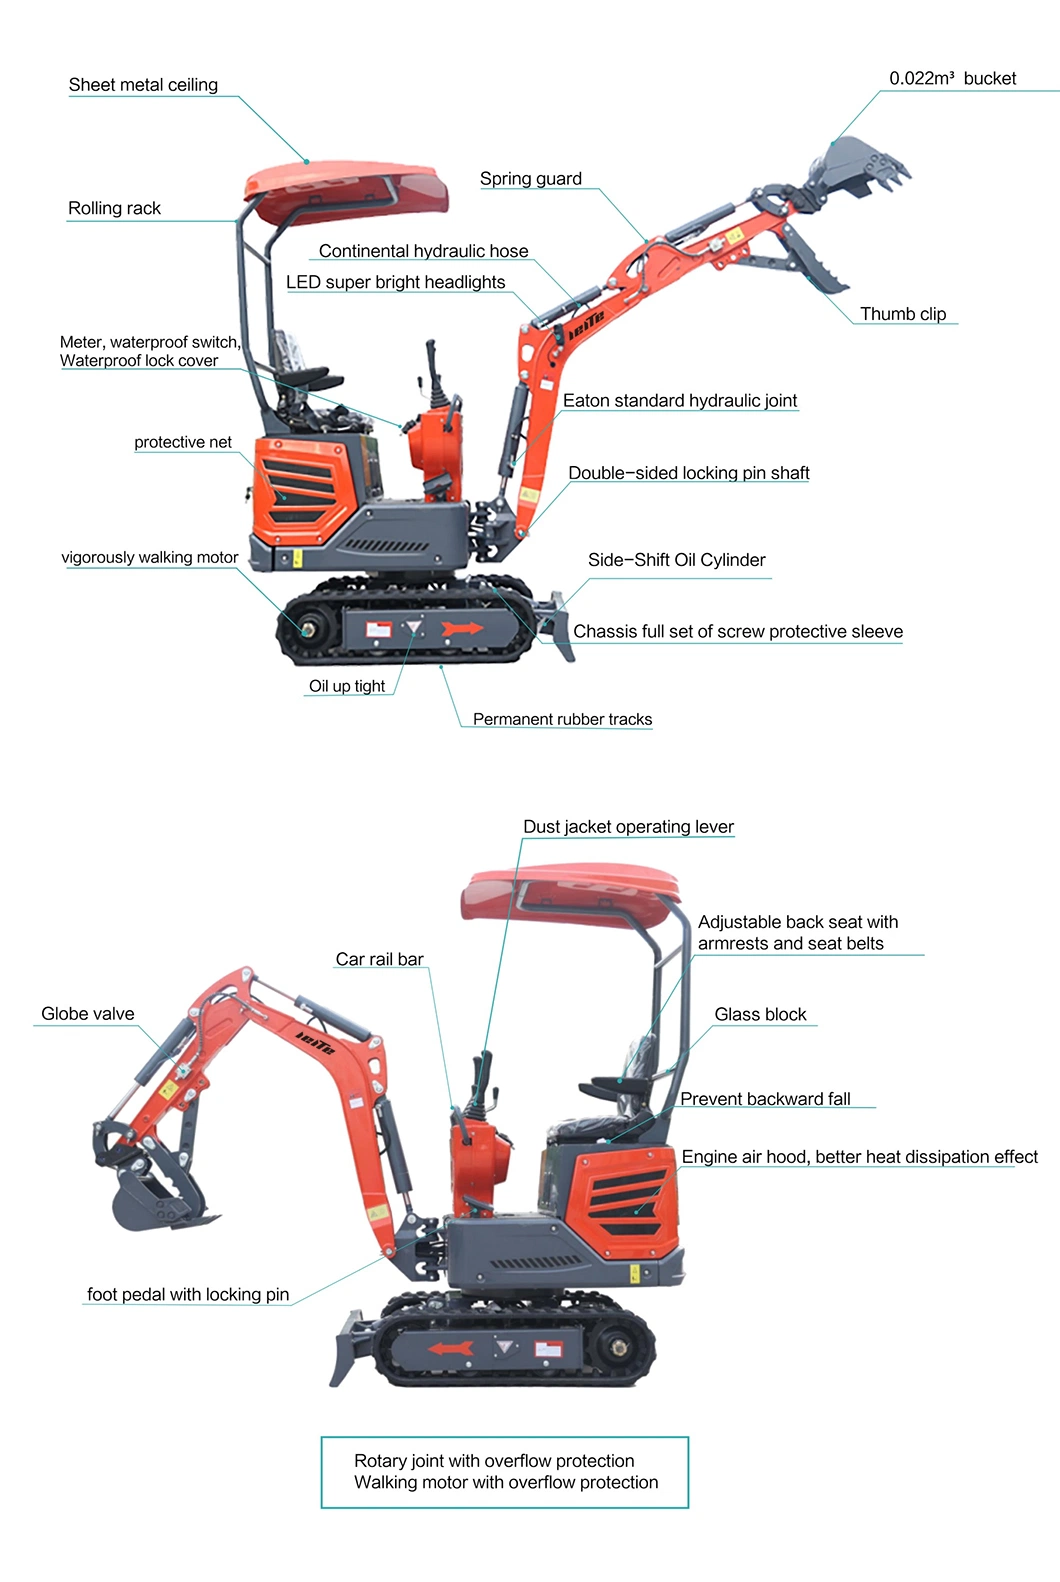 Chinese Used Mini Excavator for Sale 1000kg 1 Ton 2 Ton 3 Ton Mini Digger Quality Diesel Second Hand Crawler Excavator Factory Direct Wholesale Price for Sale